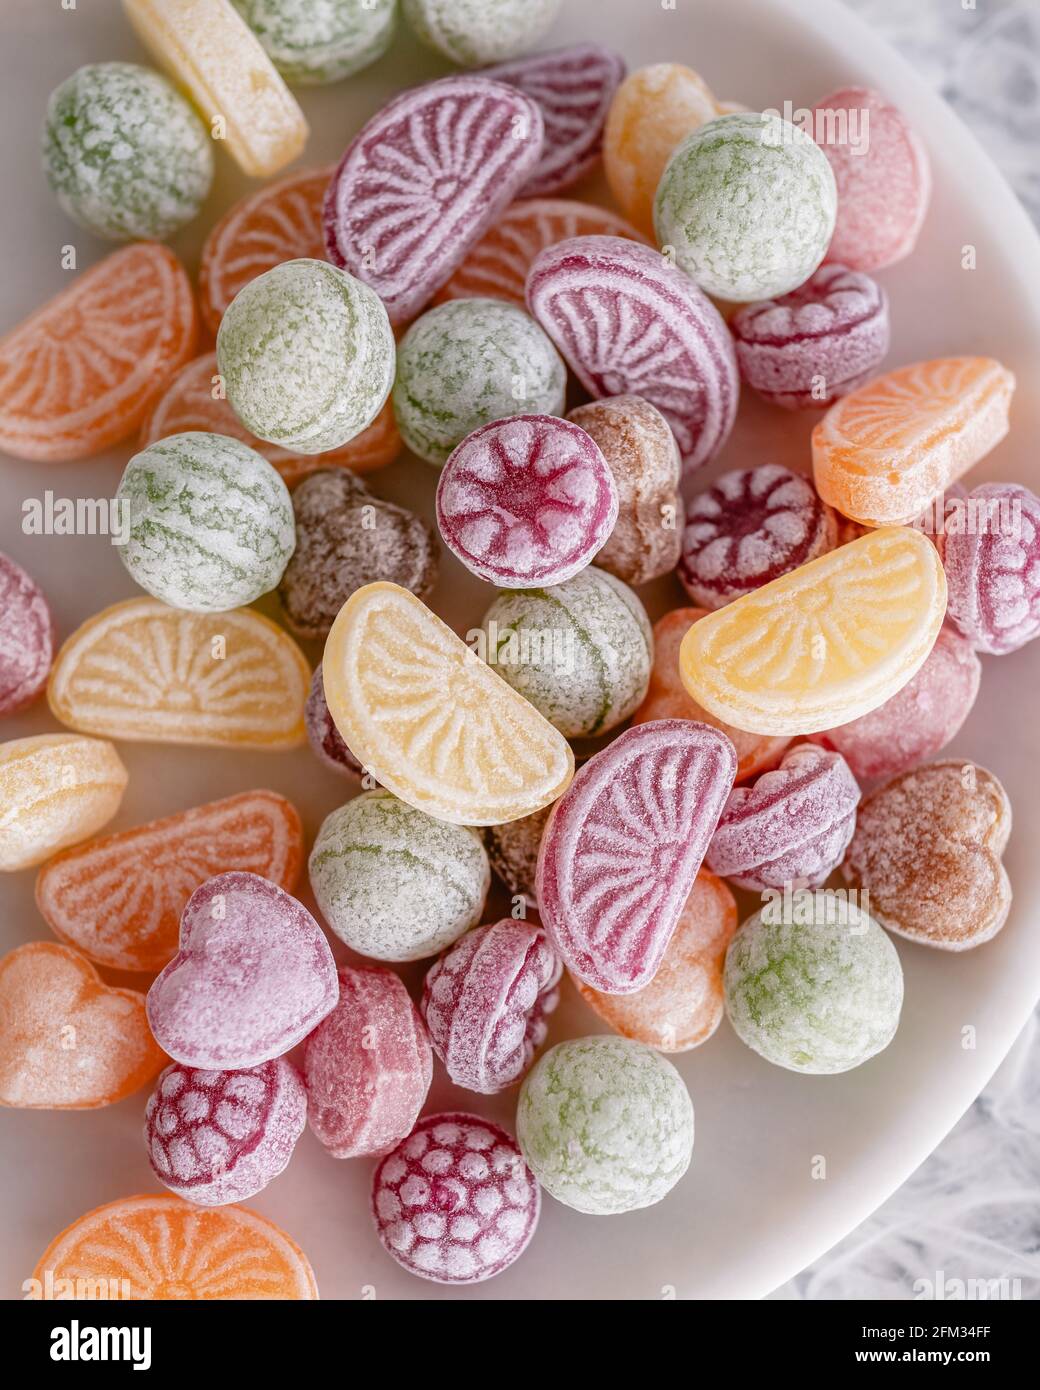 Close-up of assorted hard candy sweets on a plate Stock Photo